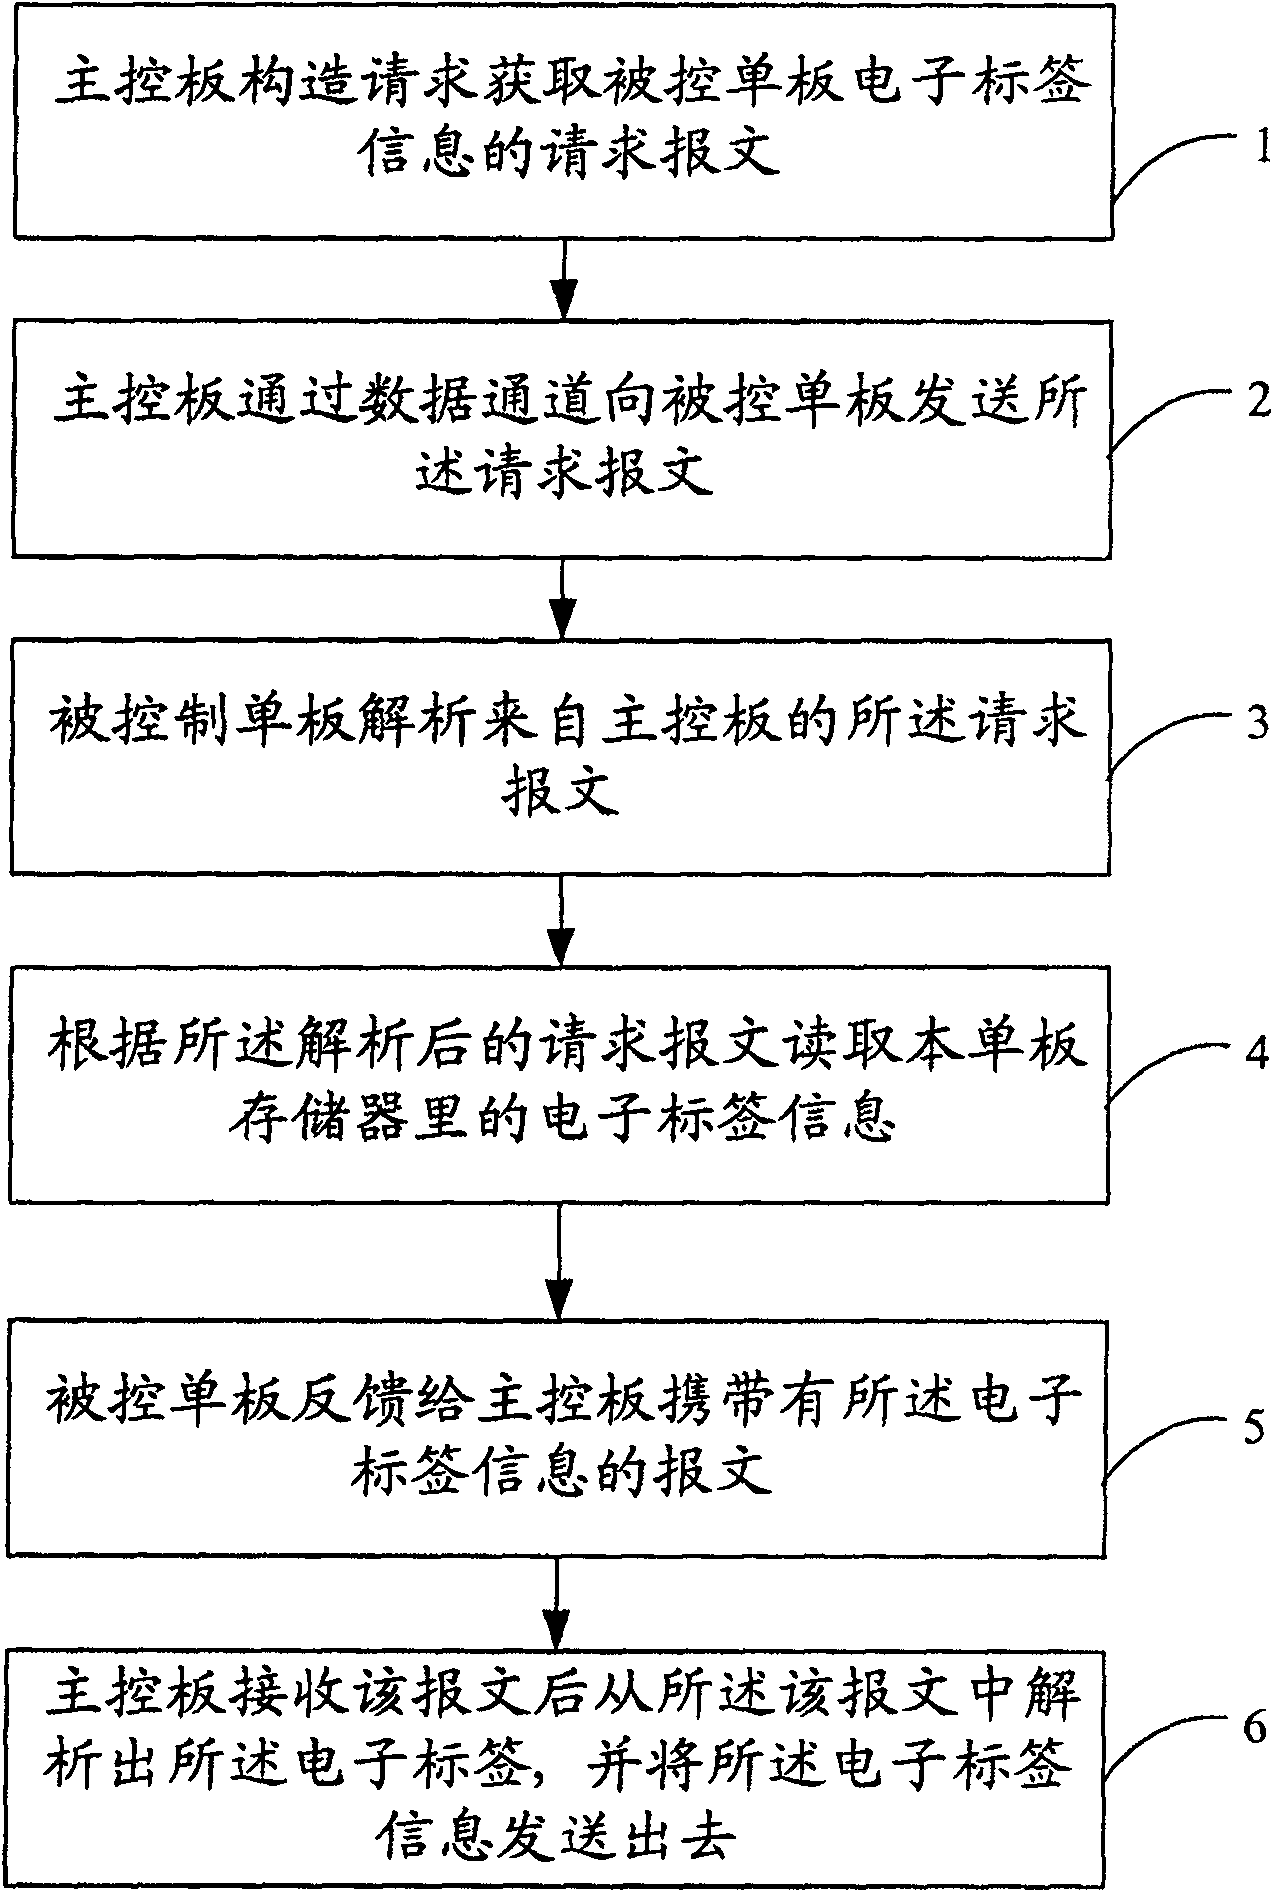 Individual board electronic tag read-write control system and method